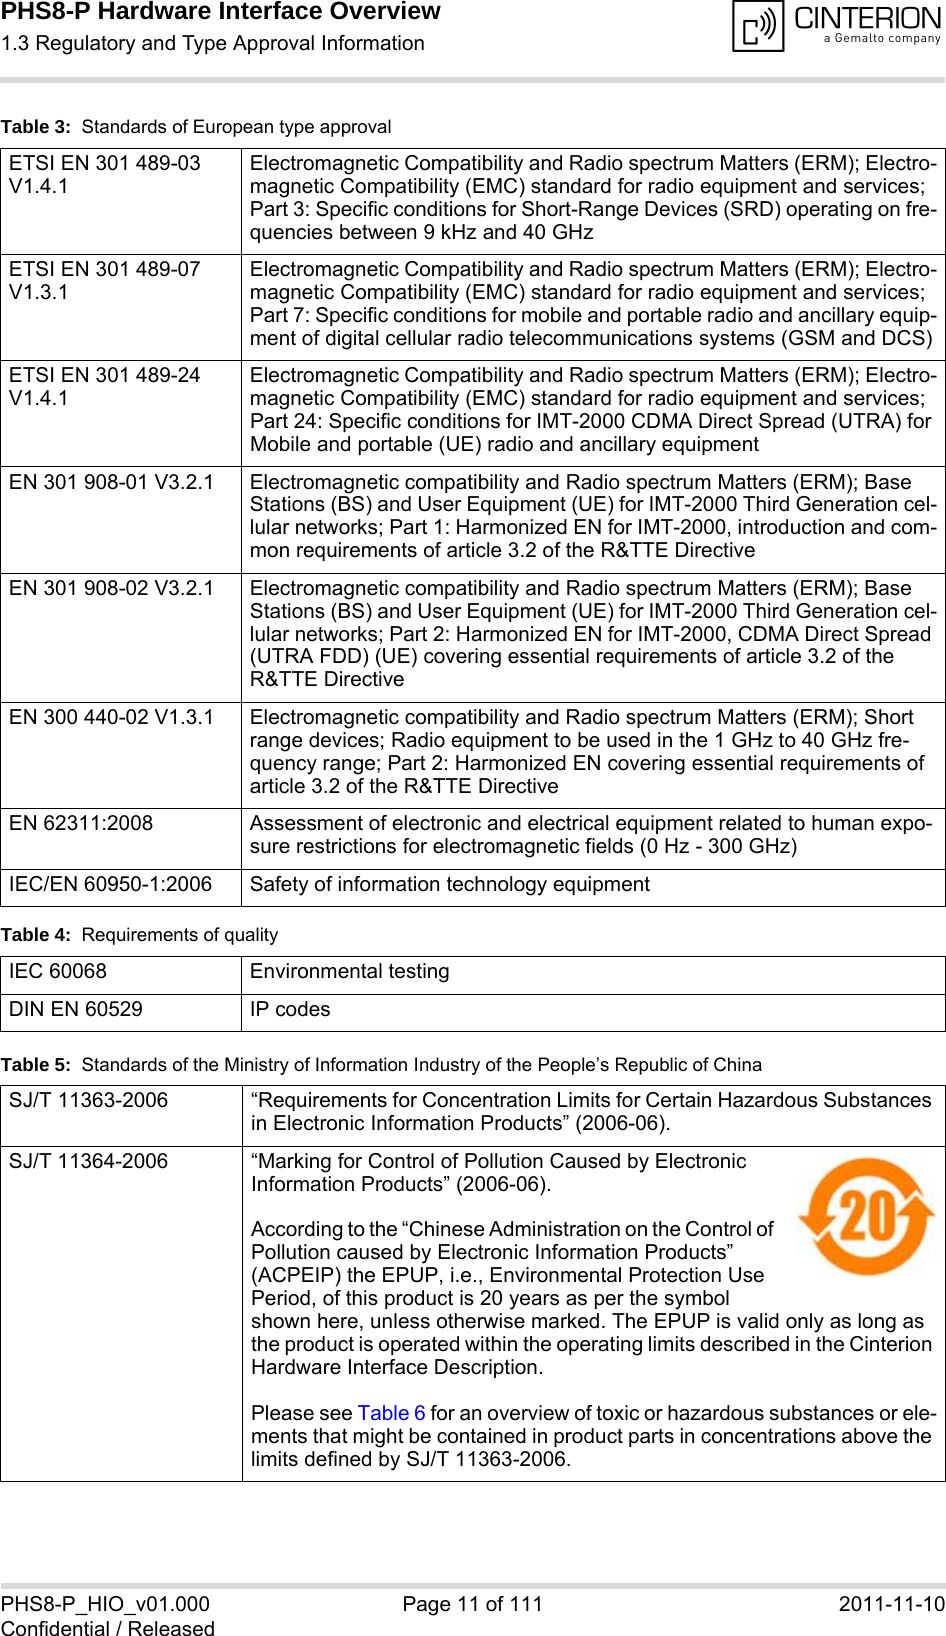 PHS8-P Hardware Interface Overview1.3 Regulatory and Type Approval Information15PHS8-P_HIO_v01.000 Page 11 of 111 2011-11-10Confidential / ReleasedETSI EN 301 489-03 V1.4.1Electromagnetic Compatibility and Radio spectrum Matters (ERM); Electro-magnetic Compatibility (EMC) standard for radio equipment and services; Part 3: Specific conditions for Short-Range Devices (SRD) operating on fre-quencies between 9 kHz and 40 GHz ETSI EN 301 489-07 V1.3.1Electromagnetic Compatibility and Radio spectrum Matters (ERM); Electro-magnetic Compatibility (EMC) standard for radio equipment and services; Part 7: Specific conditions for mobile and portable radio and ancillary equip-ment of digital cellular radio telecommunications systems (GSM and DCS)ETSI EN 301 489-24 V1.4.1Electromagnetic Compatibility and Radio spectrum Matters (ERM); Electro-magnetic Compatibility (EMC) standard for radio equipment and services; Part 24: Specific conditions for IMT-2000 CDMA Direct Spread (UTRA) for Mobile and portable (UE) radio and ancillary equipmentEN 301 908-01 V3.2.1 Electromagnetic compatibility and Radio spectrum Matters (ERM); Base Stations (BS) and User Equipment (UE) for IMT-2000 Third Generation cel-lular networks; Part 1: Harmonized EN for IMT-2000, introduction and com-mon requirements of article 3.2 of the R&amp;TTE DirectiveEN 301 908-02 V3.2.1 Electromagnetic compatibility and Radio spectrum Matters (ERM); Base Stations (BS) and User Equipment (UE) for IMT-2000 Third Generation cel-lular networks; Part 2: Harmonized EN for IMT-2000, CDMA Direct Spread (UTRA FDD) (UE) covering essential requirements of article 3.2 of the R&amp;TTE DirectiveEN 300 440-02 V1.3.1  Electromagnetic compatibility and Radio spectrum Matters (ERM); Short range devices; Radio equipment to be used in the 1 GHz to 40 GHz fre-quency range; Part 2: Harmonized EN covering essential requirements of article 3.2 of the R&amp;TTE Directive EN 62311:2008 Assessment of electronic and electrical equipment related to human expo-sure restrictions for electromagnetic fields (0 Hz - 300 GHz)IEC/EN 60950-1:2006 Safety of information technology equipmentTable 4:  Requirements of qualityIEC 60068 Environmental testingDIN EN 60529 IP codesTable 5:  Standards of the Ministry of Information Industry of the People’s Republic of ChinaSJ/T 11363-2006  “Requirements for Concentration Limits for Certain Hazardous Substances in Electronic Information Products” (2006-06).SJ/T 11364-2006 “Marking for Control of Pollution Caused by Electronic Information Products” (2006-06).According to the “Chinese Administration on the Control of Pollution caused by Electronic Information Products” (ACPEIP) the EPUP, i.e., Environmental Protection Use Period, of this product is 20 years as per the symbol shown here, unless otherwise marked. The EPUP is valid only as long as the product is operated within the operating limits described in the Cinterion Hardware Interface Description.Please see Table 6 for an overview of toxic or hazardous substances or ele-ments that might be contained in product parts in concentrations above the limits defined by SJ/T 11363-2006. Table 3:  Standards of European type approval